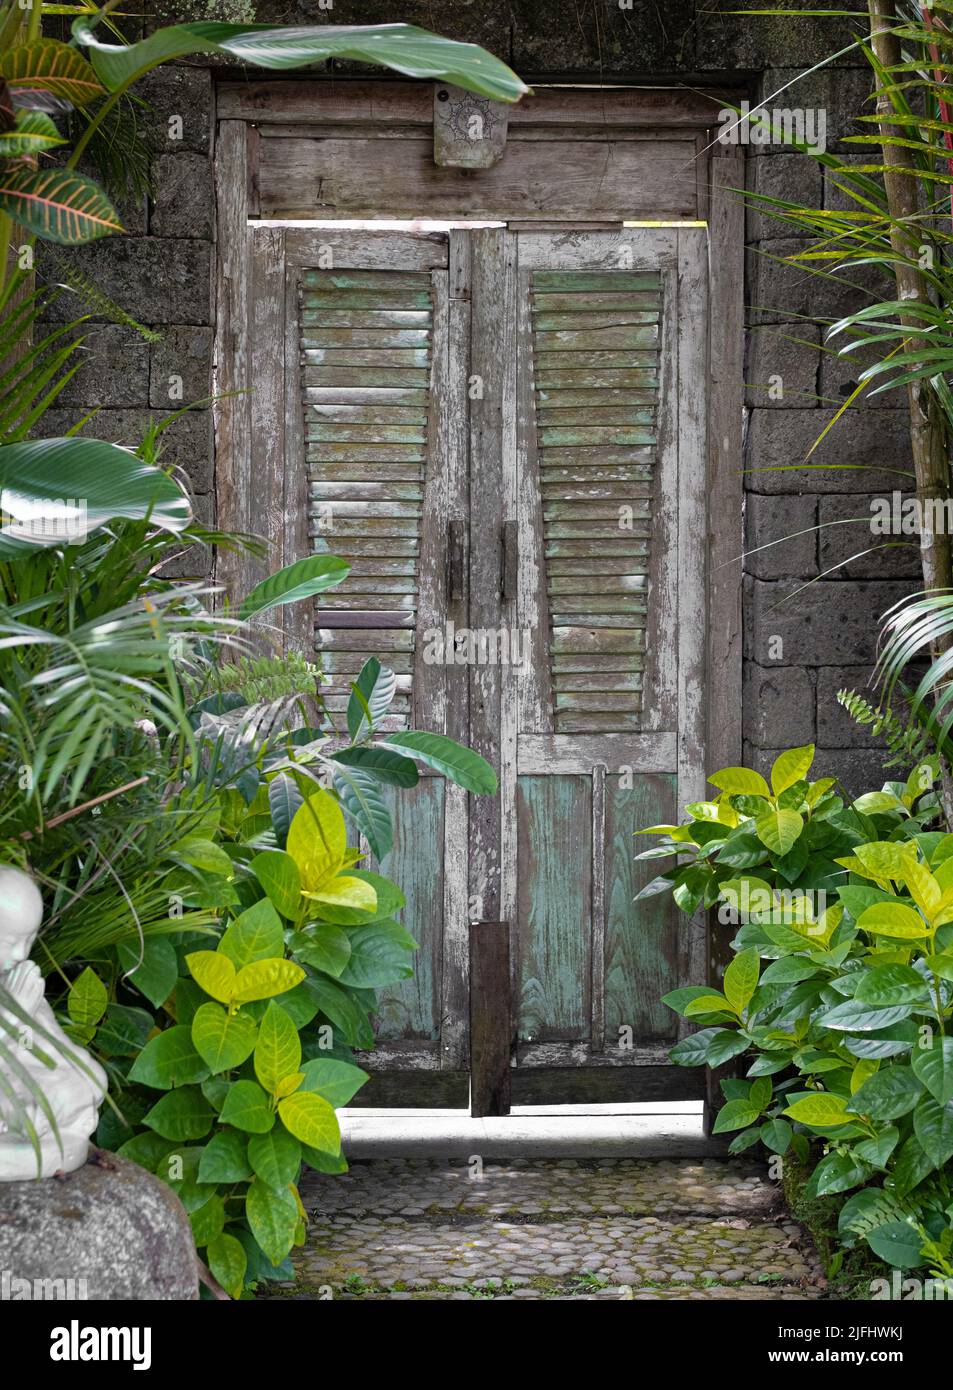 Old gray Balinese wooden doors with slats and patina blue panels and shutter slats. Tropical plants on both sides of doors. Stock Photo